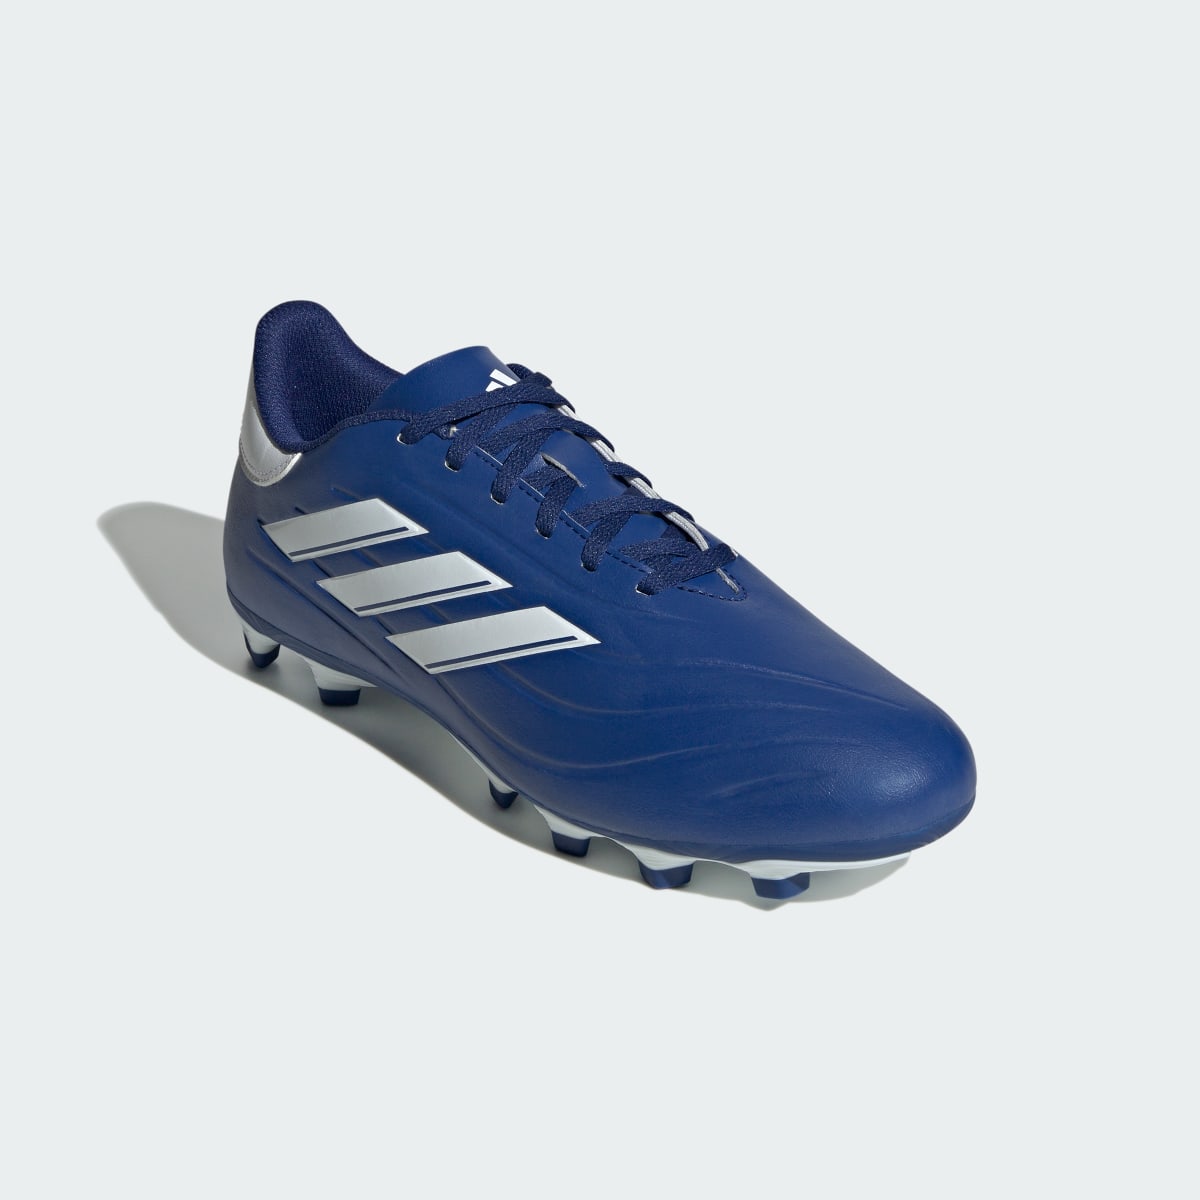 Adidas Copa Pure II.4 Flexible Ground Boots. 5